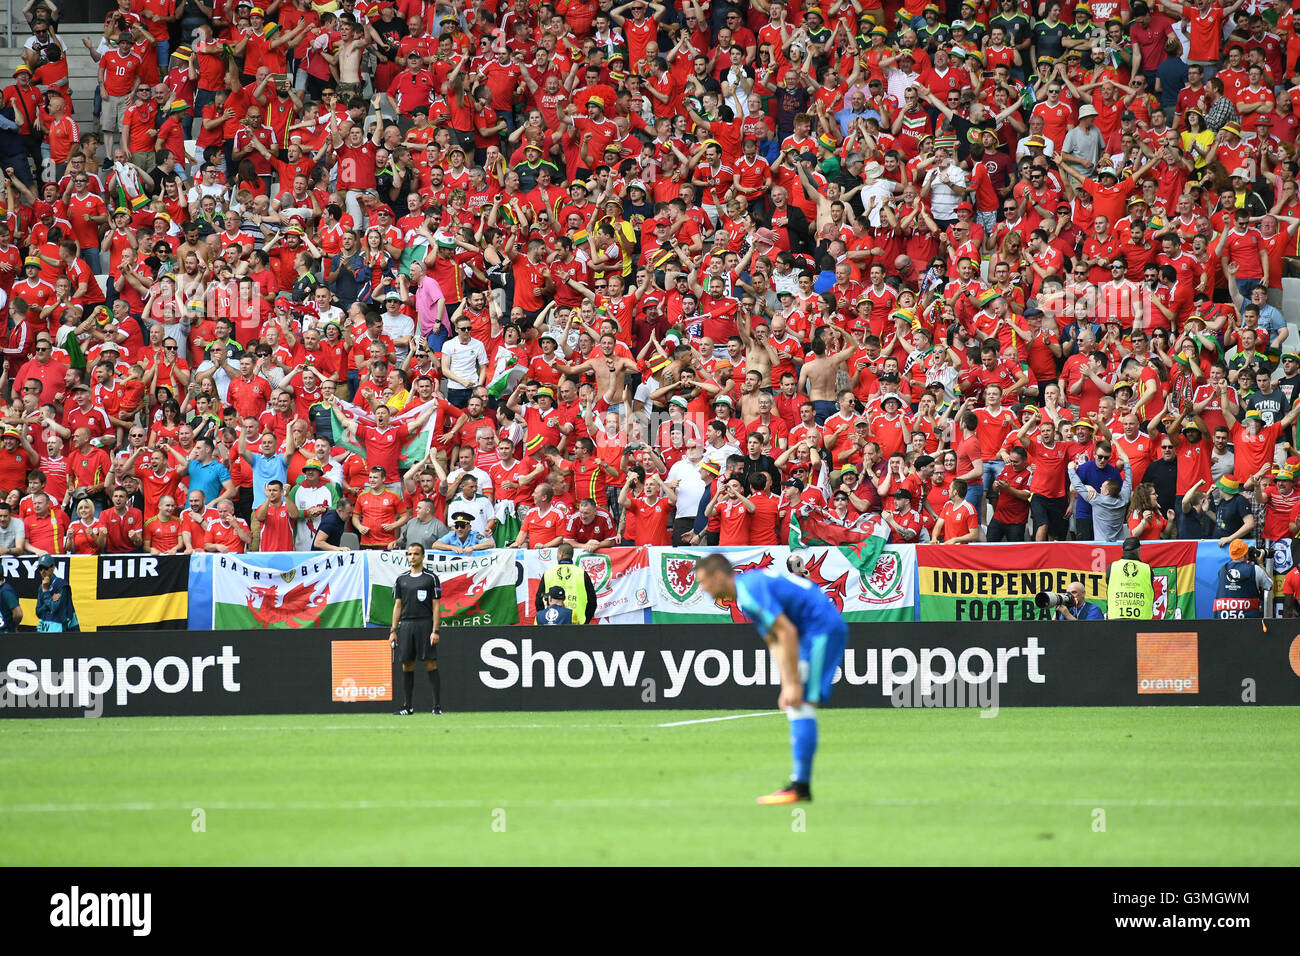 A sea of red Welsh fans wearing red as Wales take on Slovakia in their Euro 2016 Group B fixture at the Matmut Atlantique , Nouveau Stade de Bordeaux  in Bordeaux, France on Saturday 11th June 2016. Stock Photo